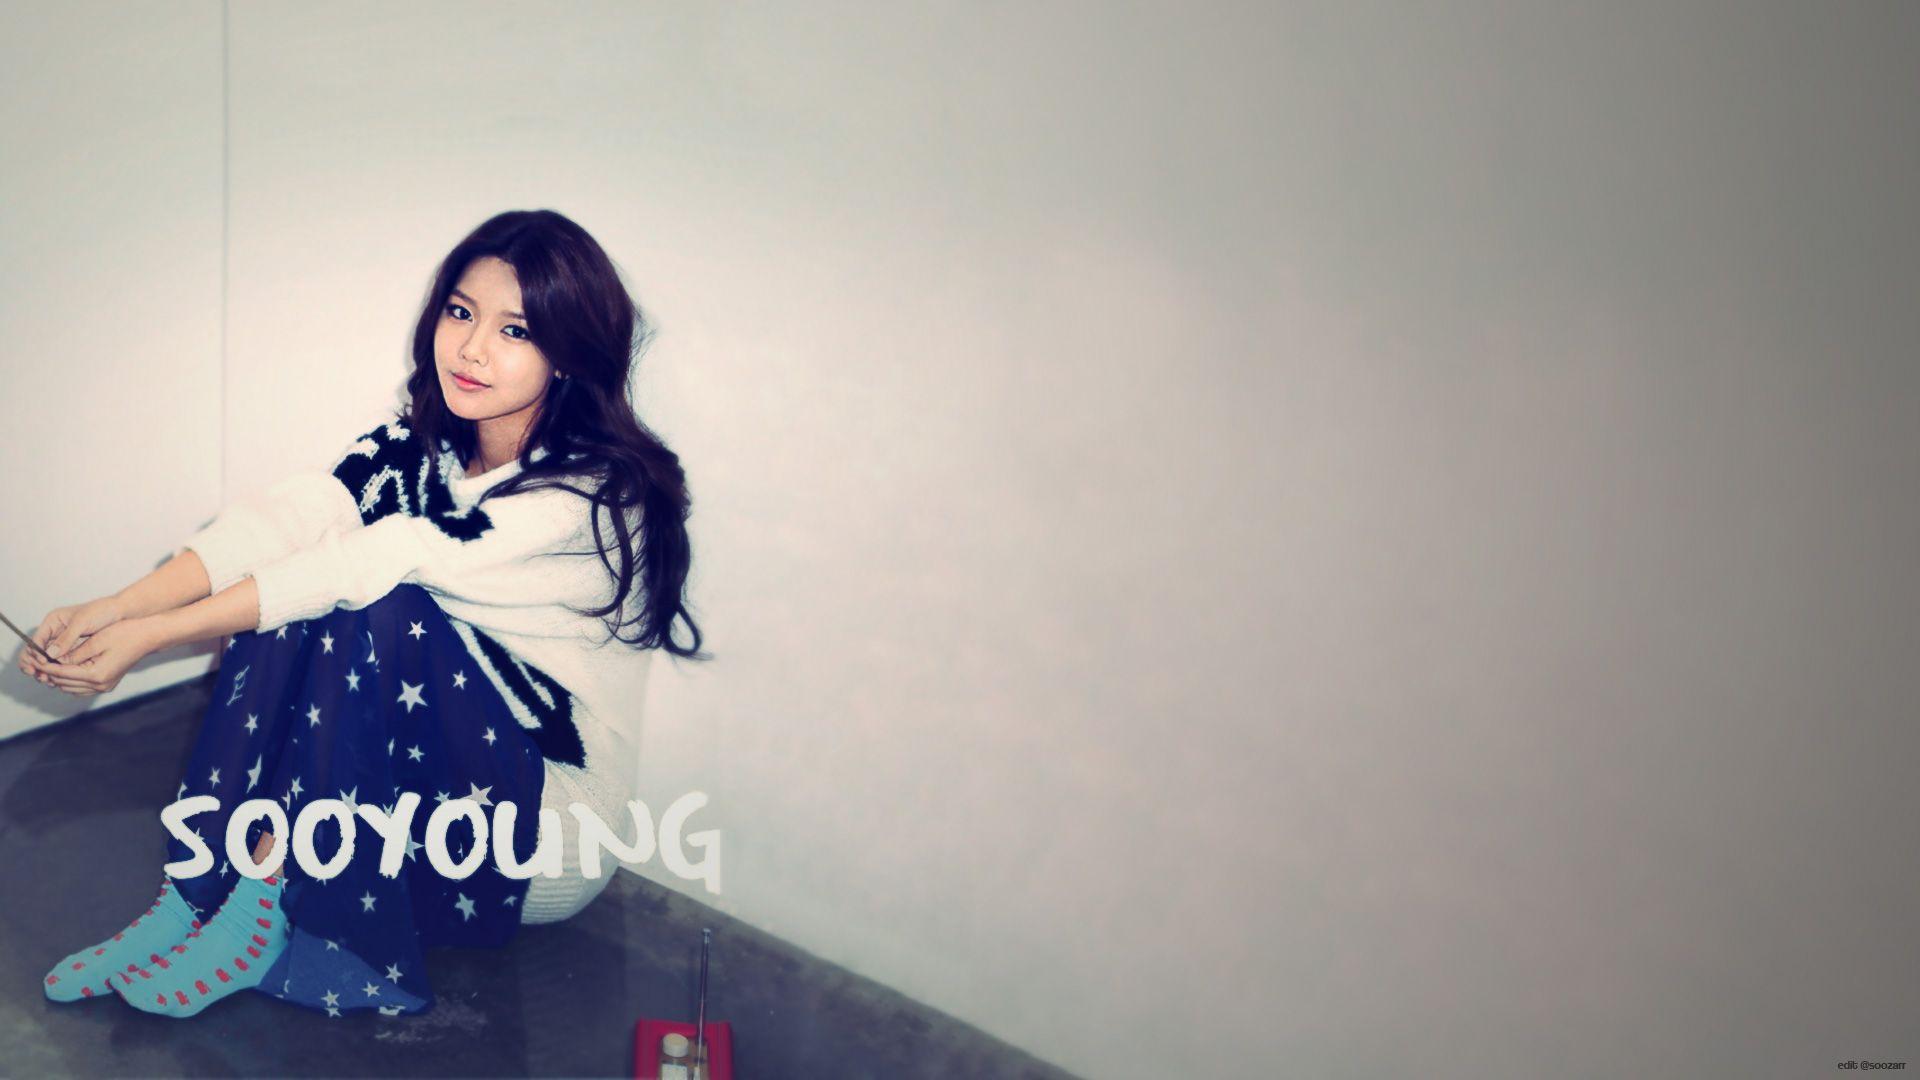 Snsd Sooyoung Wallpaper (82+ images)